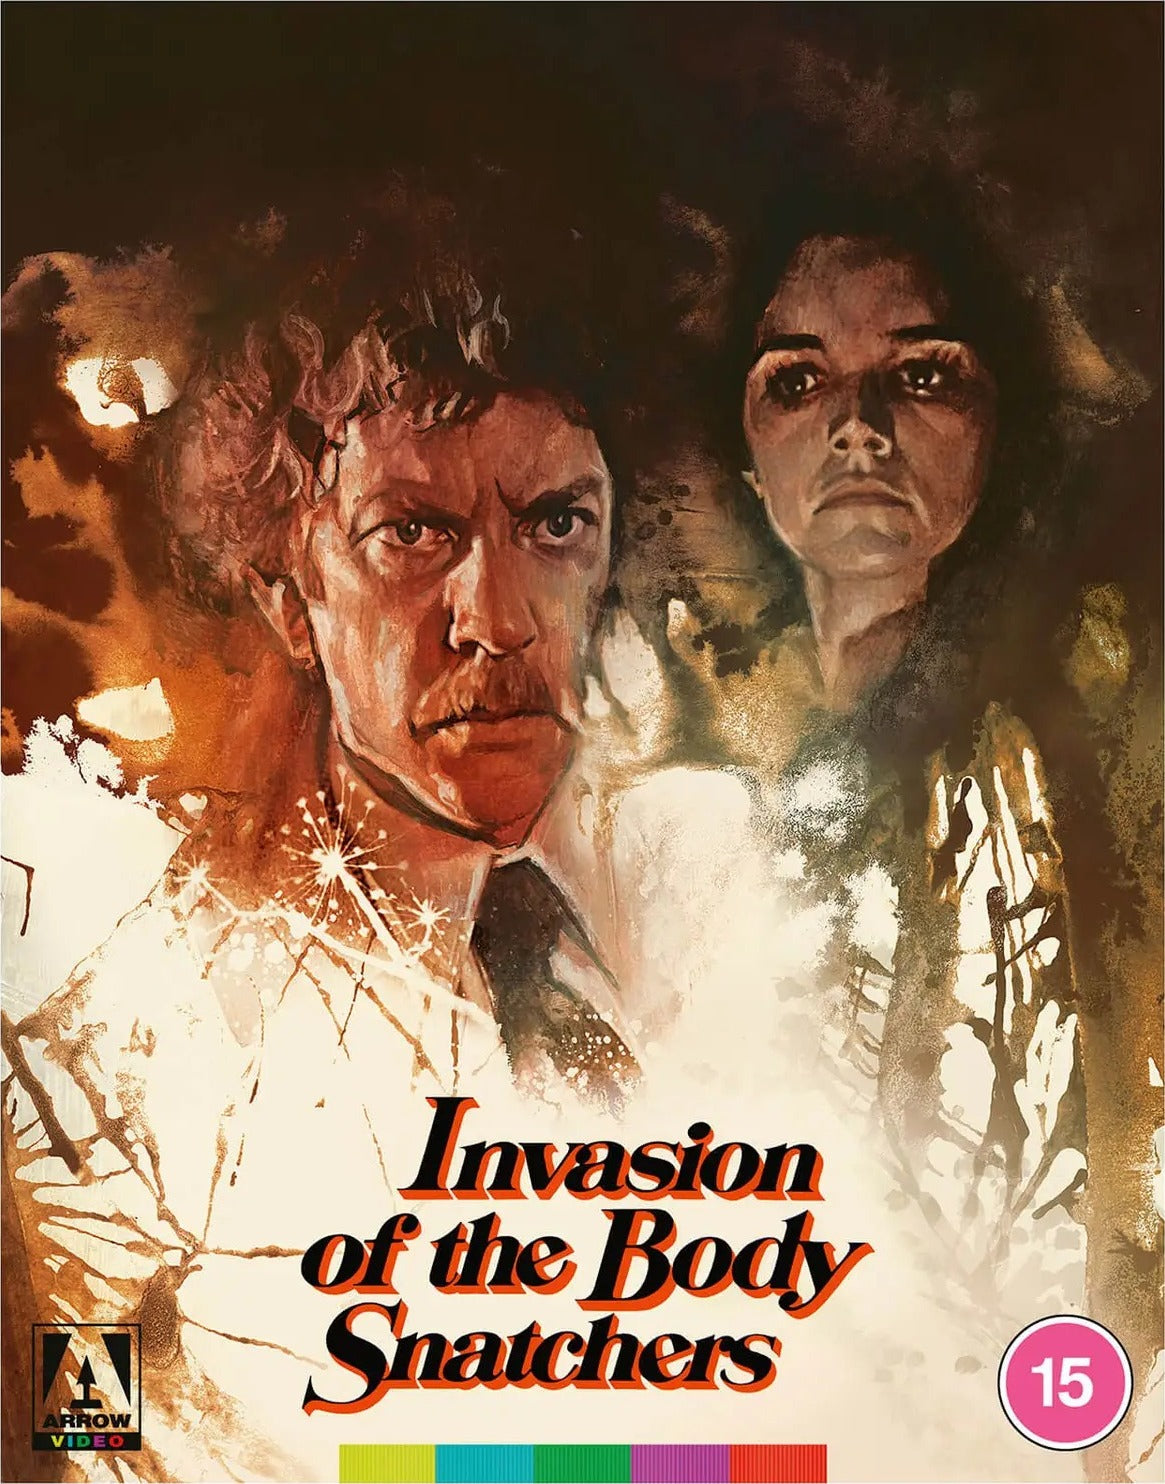 INVASION OF THE BODY SNATCHERS (REGION B IMPORT - LIMITED EDITION) BLU-RAY